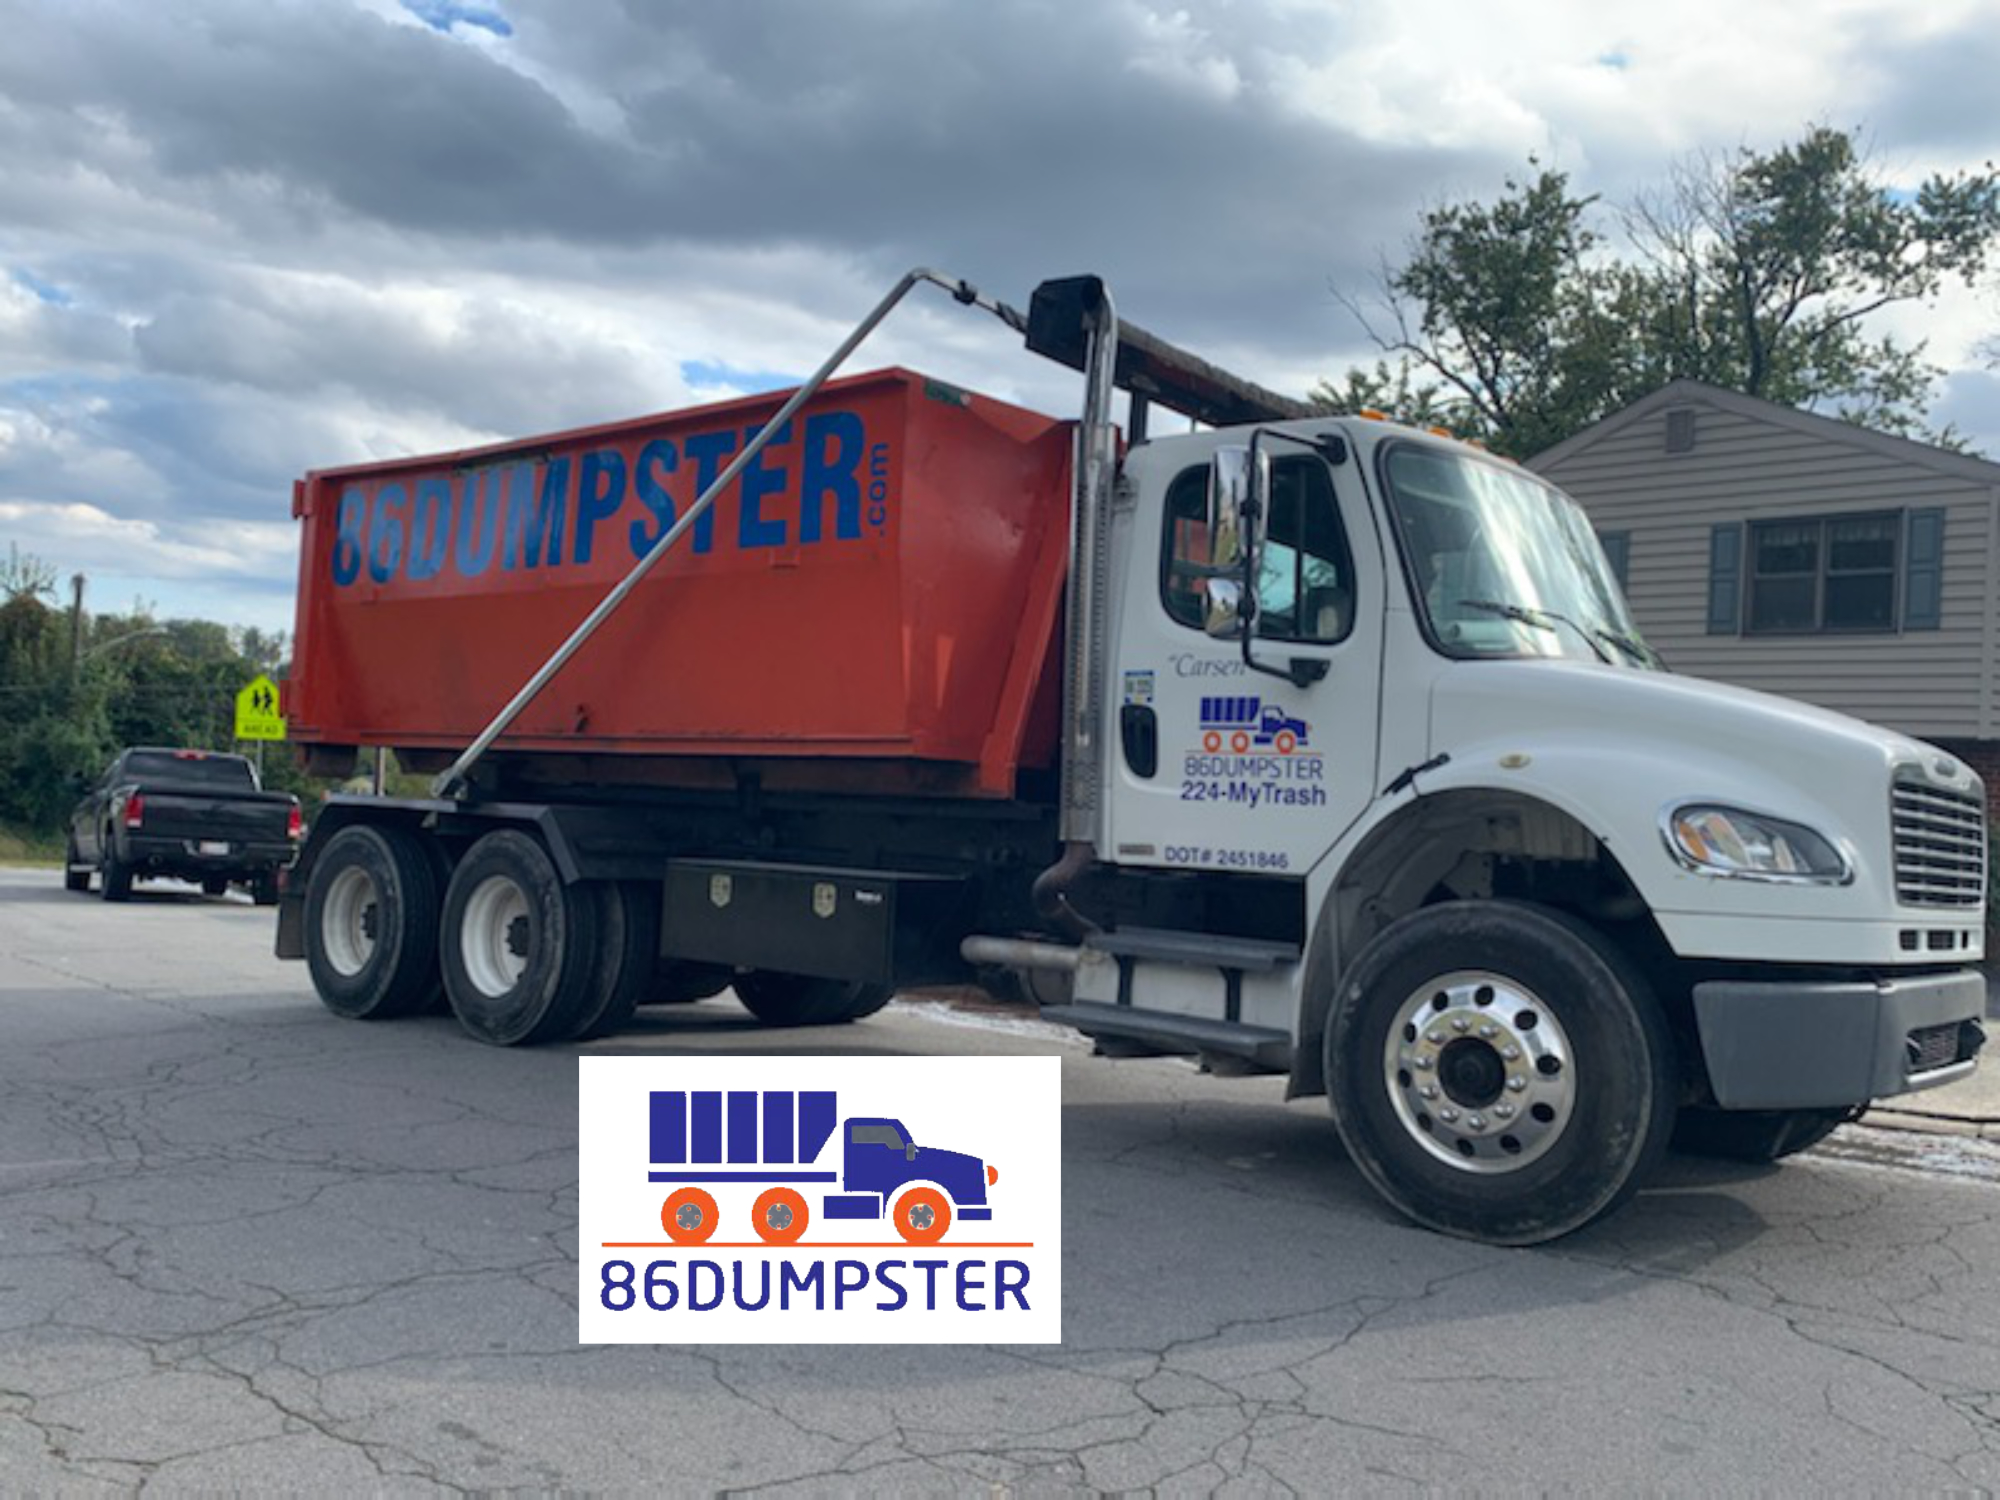 Book a Dumpster Rental 86 Dumpster Dundalk MD and Contractors Use for All Projects